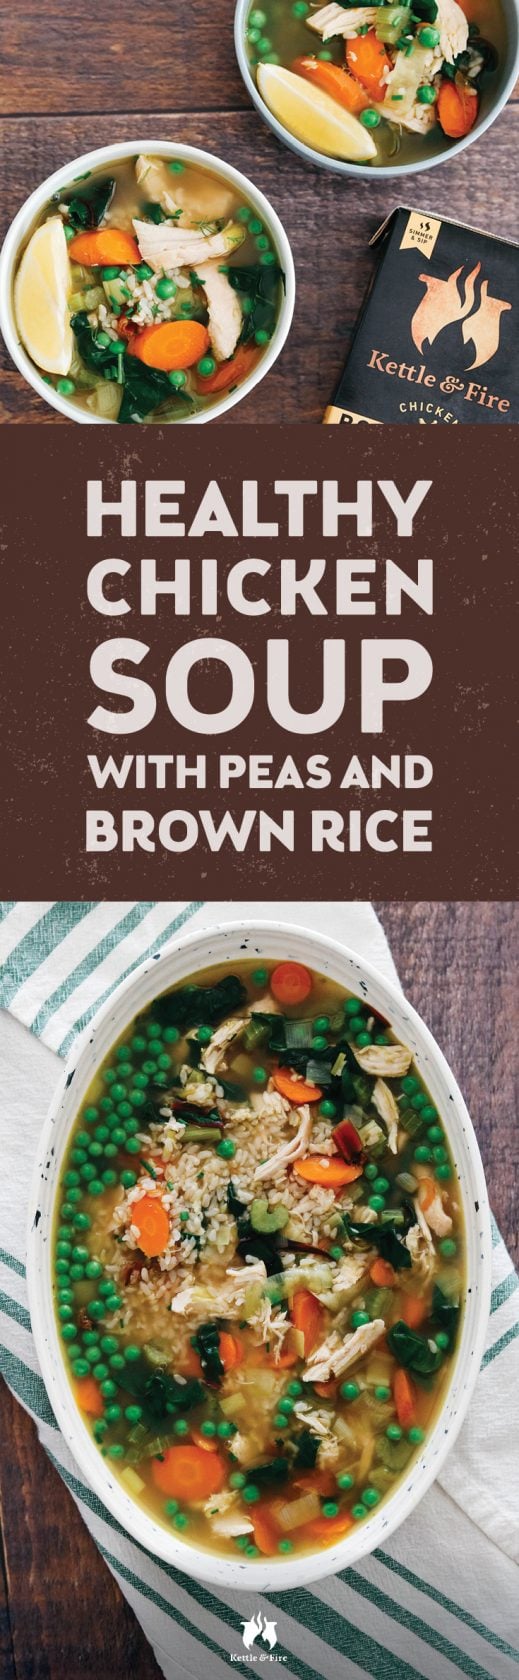 Tender bits of shredded chicken cooked in coconut oil and bone broth are the highlight of this healthy chicken soup recipe. This soup recipe is fortified with our Kettle & Fire Chicken Bone Broth, which ups the nutrition with a good dose of collagen and extra protein.